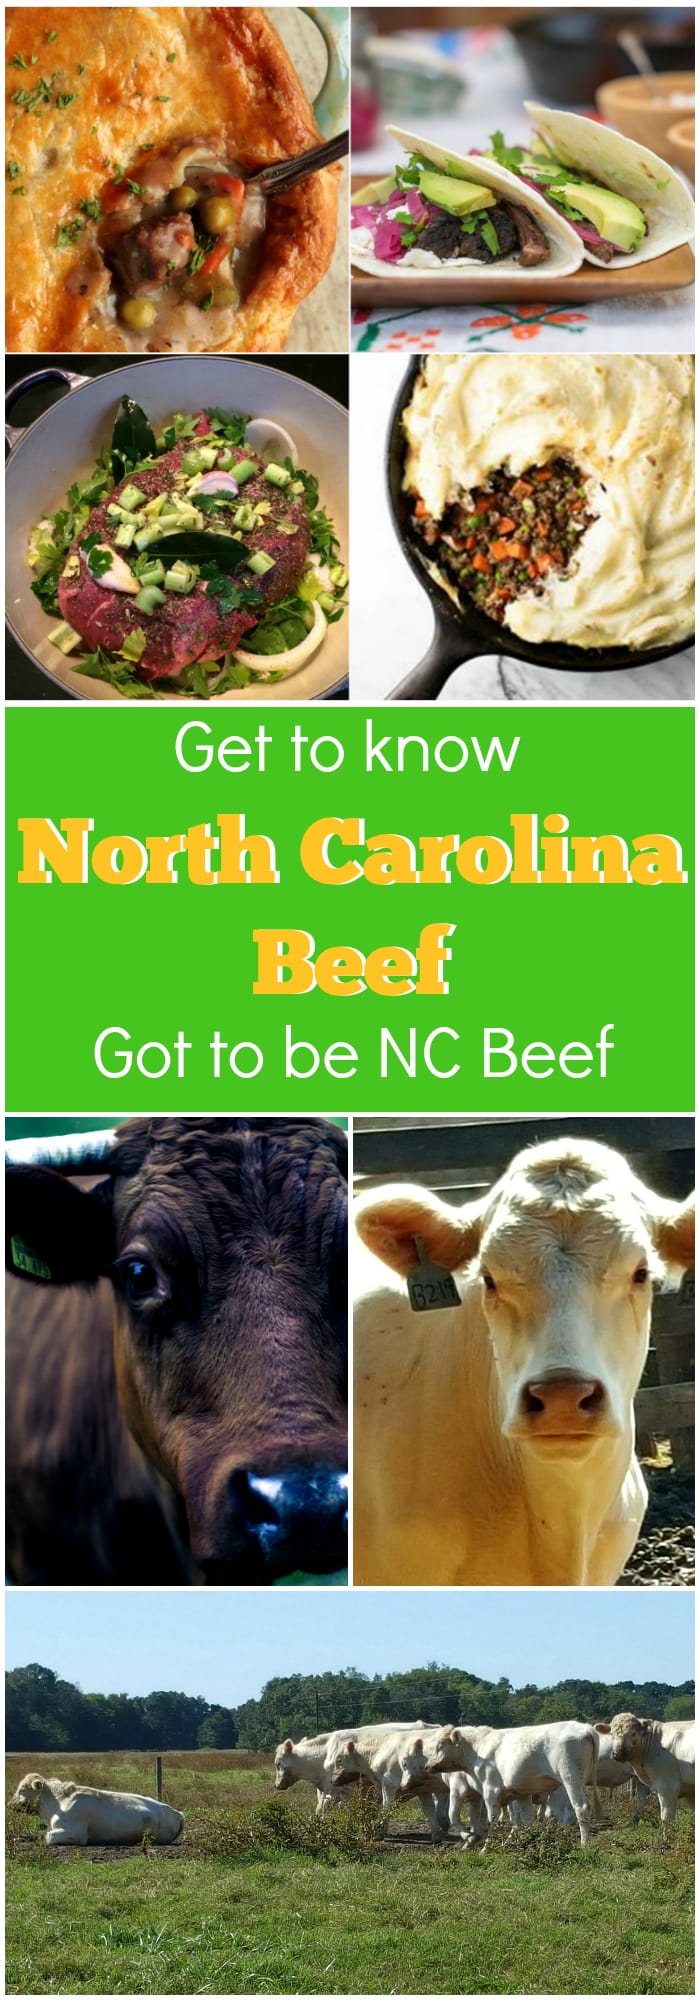 Collage of recipe and cow photos with text reading, "Get to know North Carolina Beach, Got to be NC Beef".